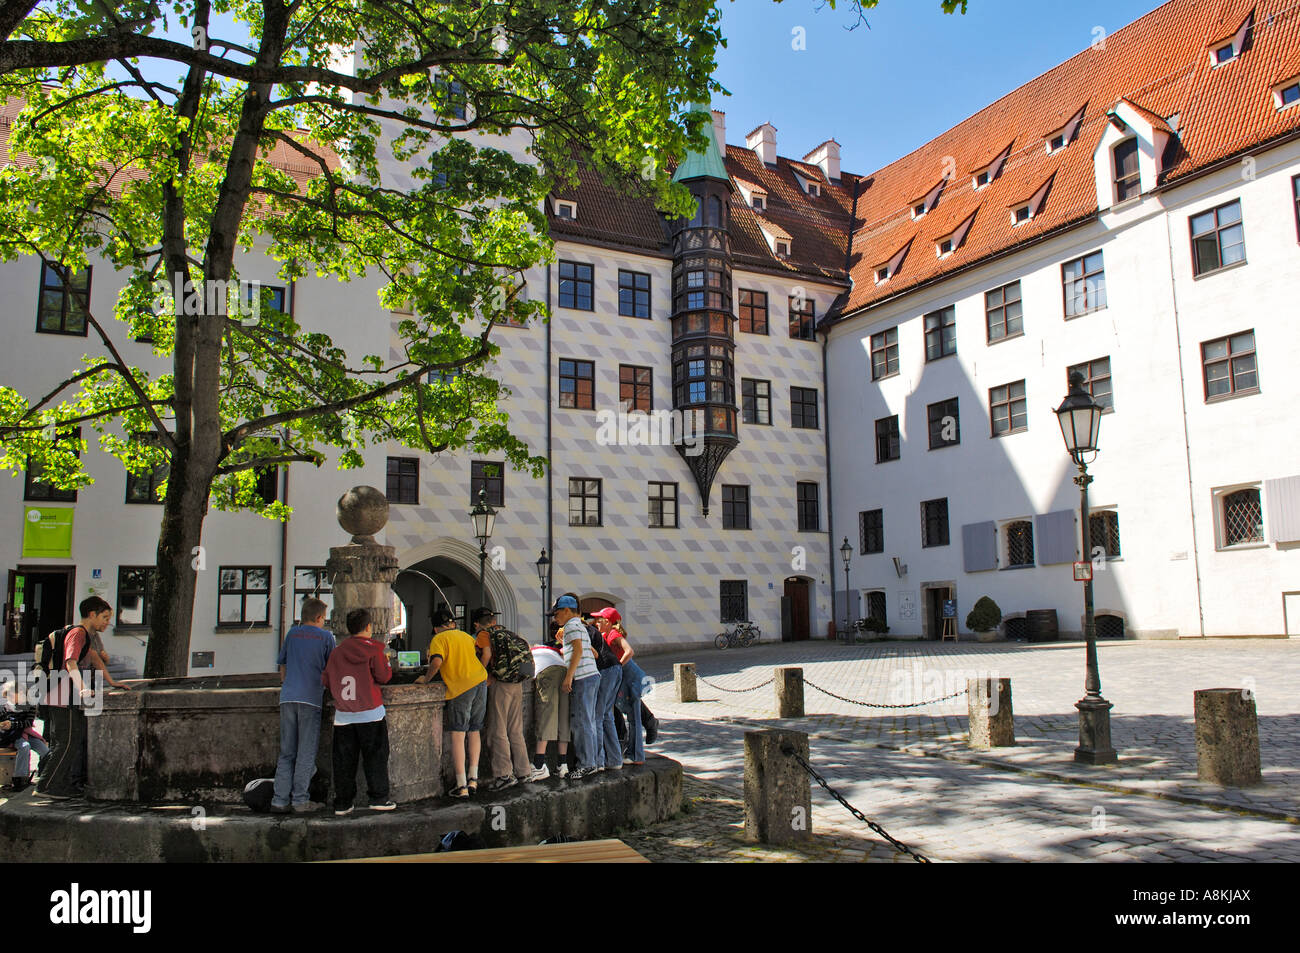 Fountain with children in the old courtyard of the Residence, Munich, Bavaria, Germany Stock Photo